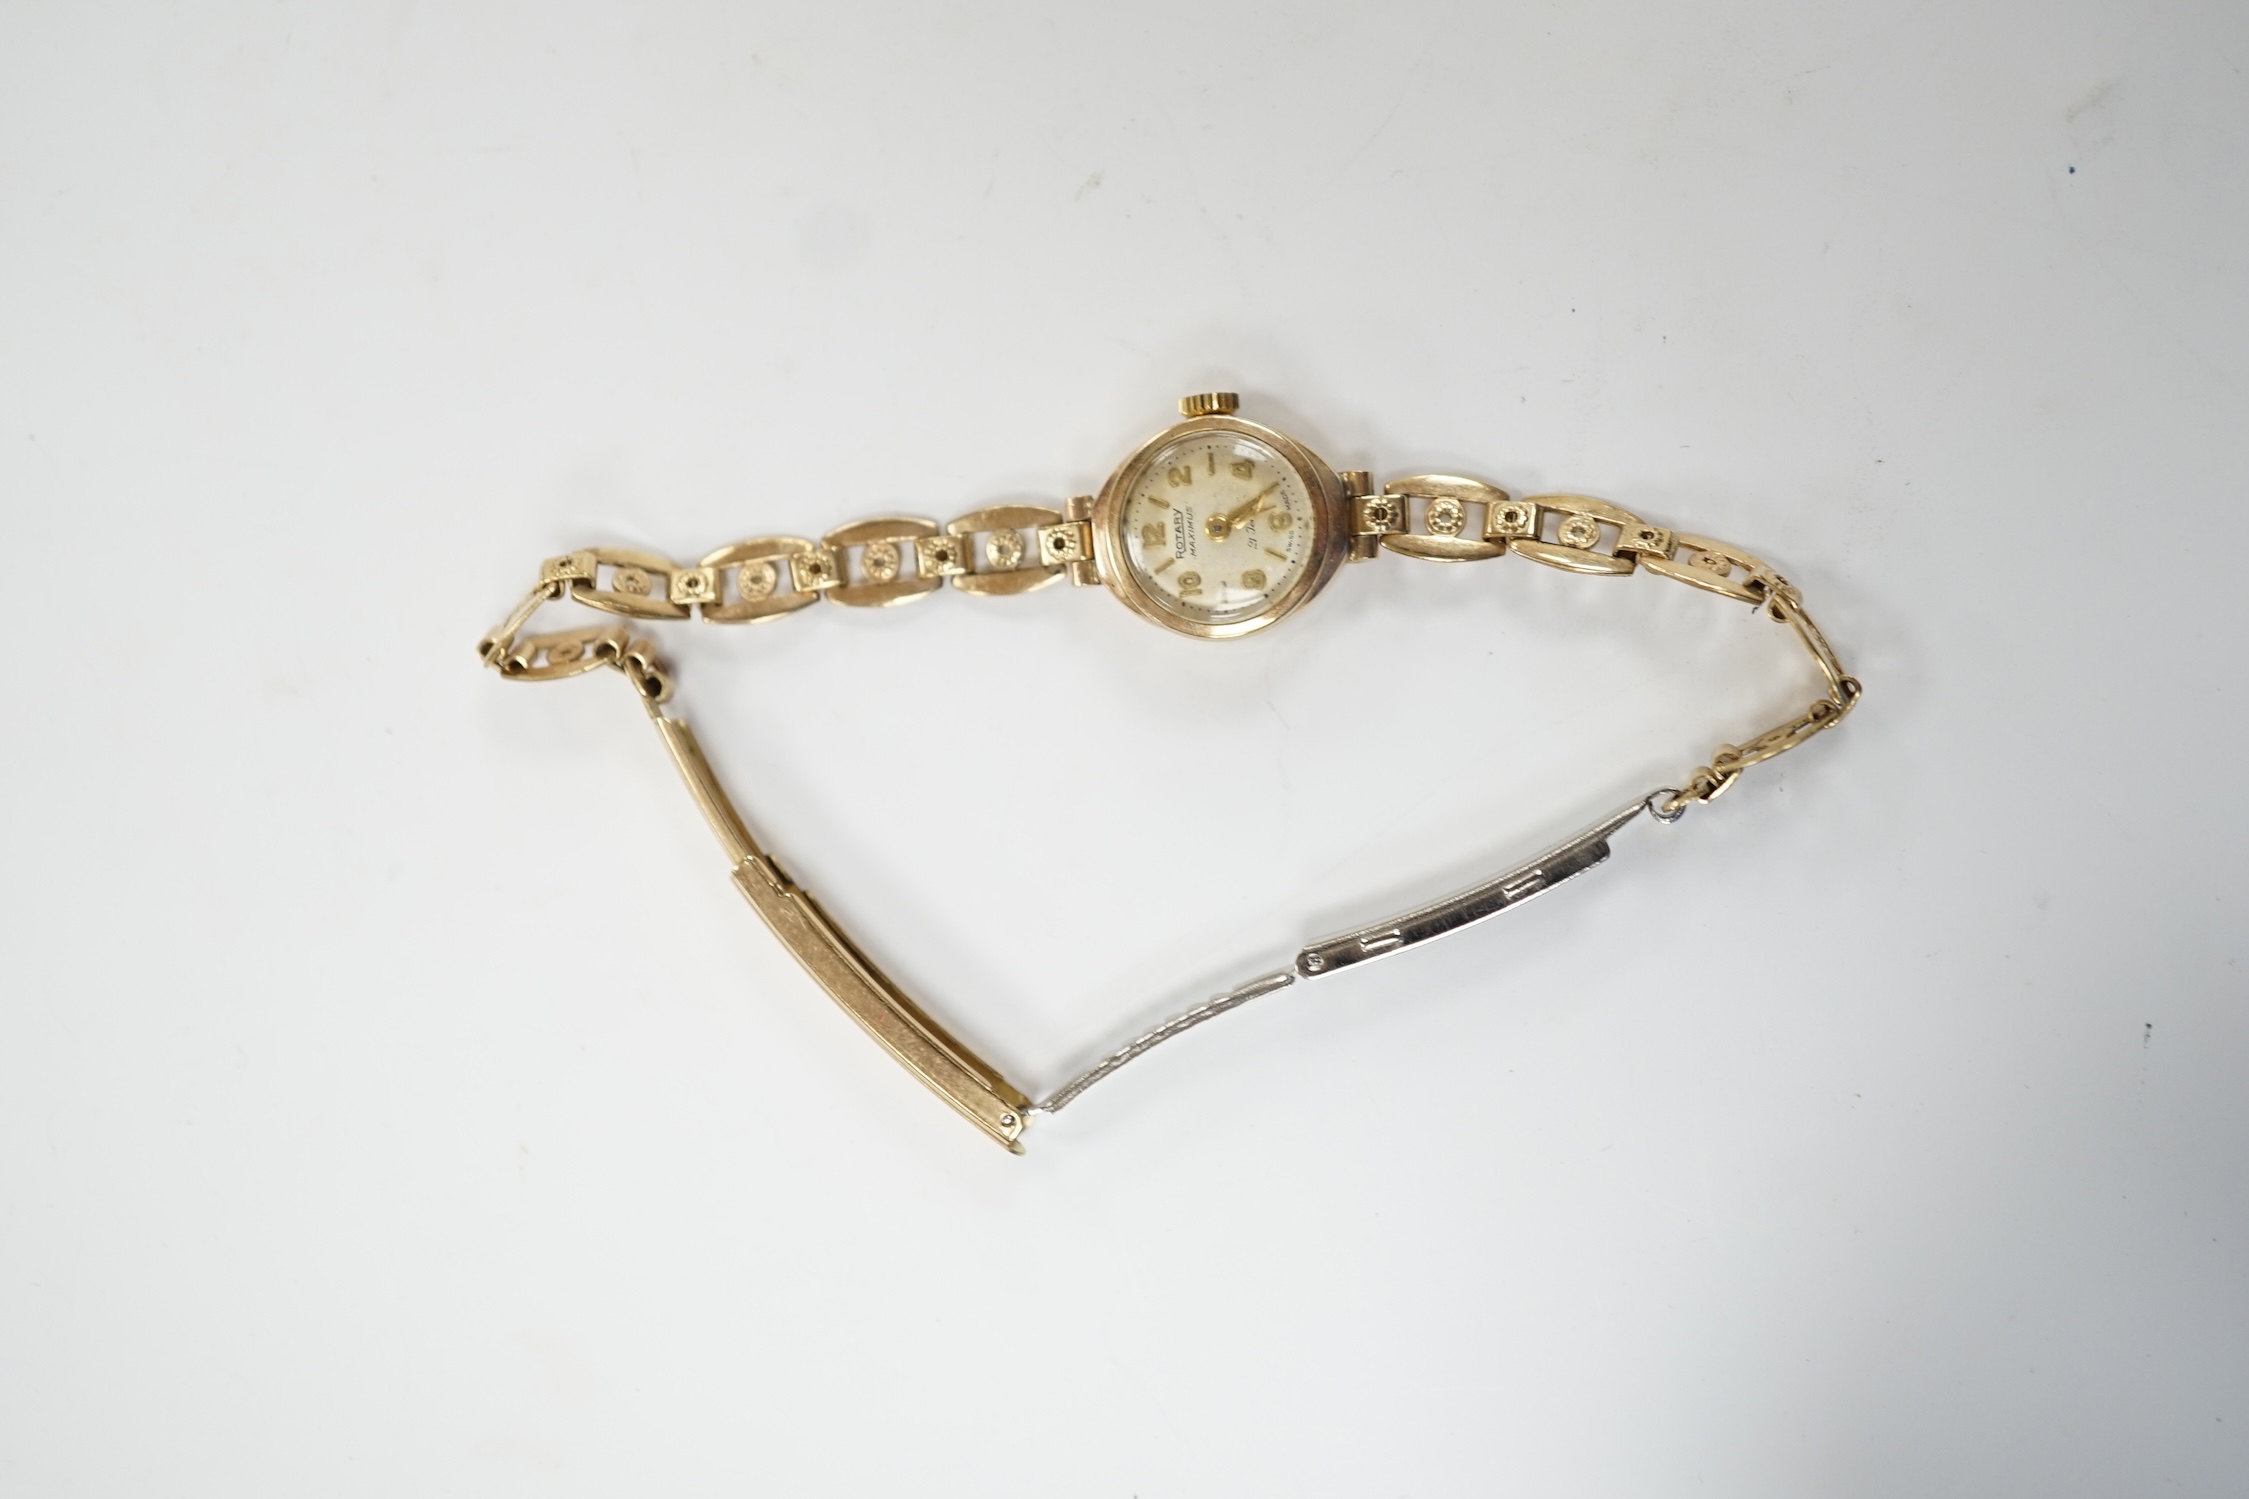 A lady's 9ct gold Rotary Maximus manual wind wrist watch, on a rolled gold bracelet. Condition - fair